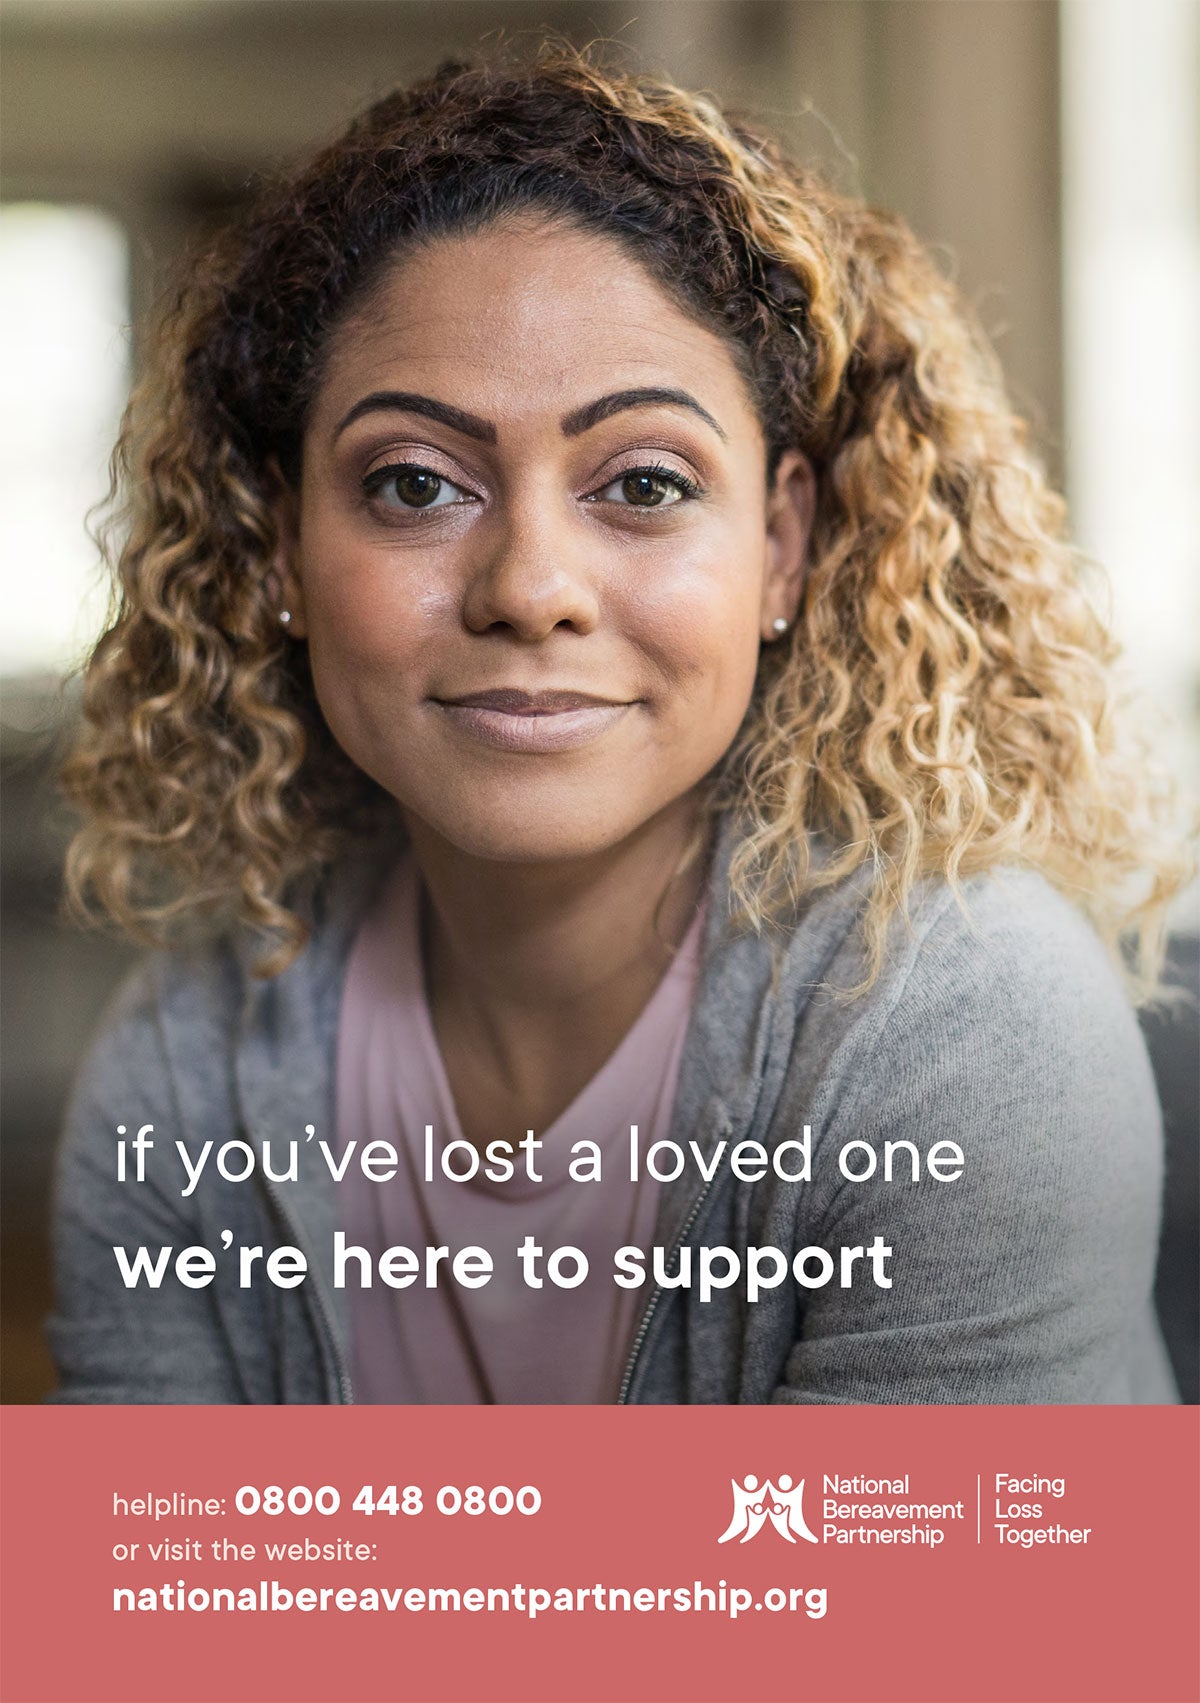 The National Bereavement Partnership - We're Here To Help